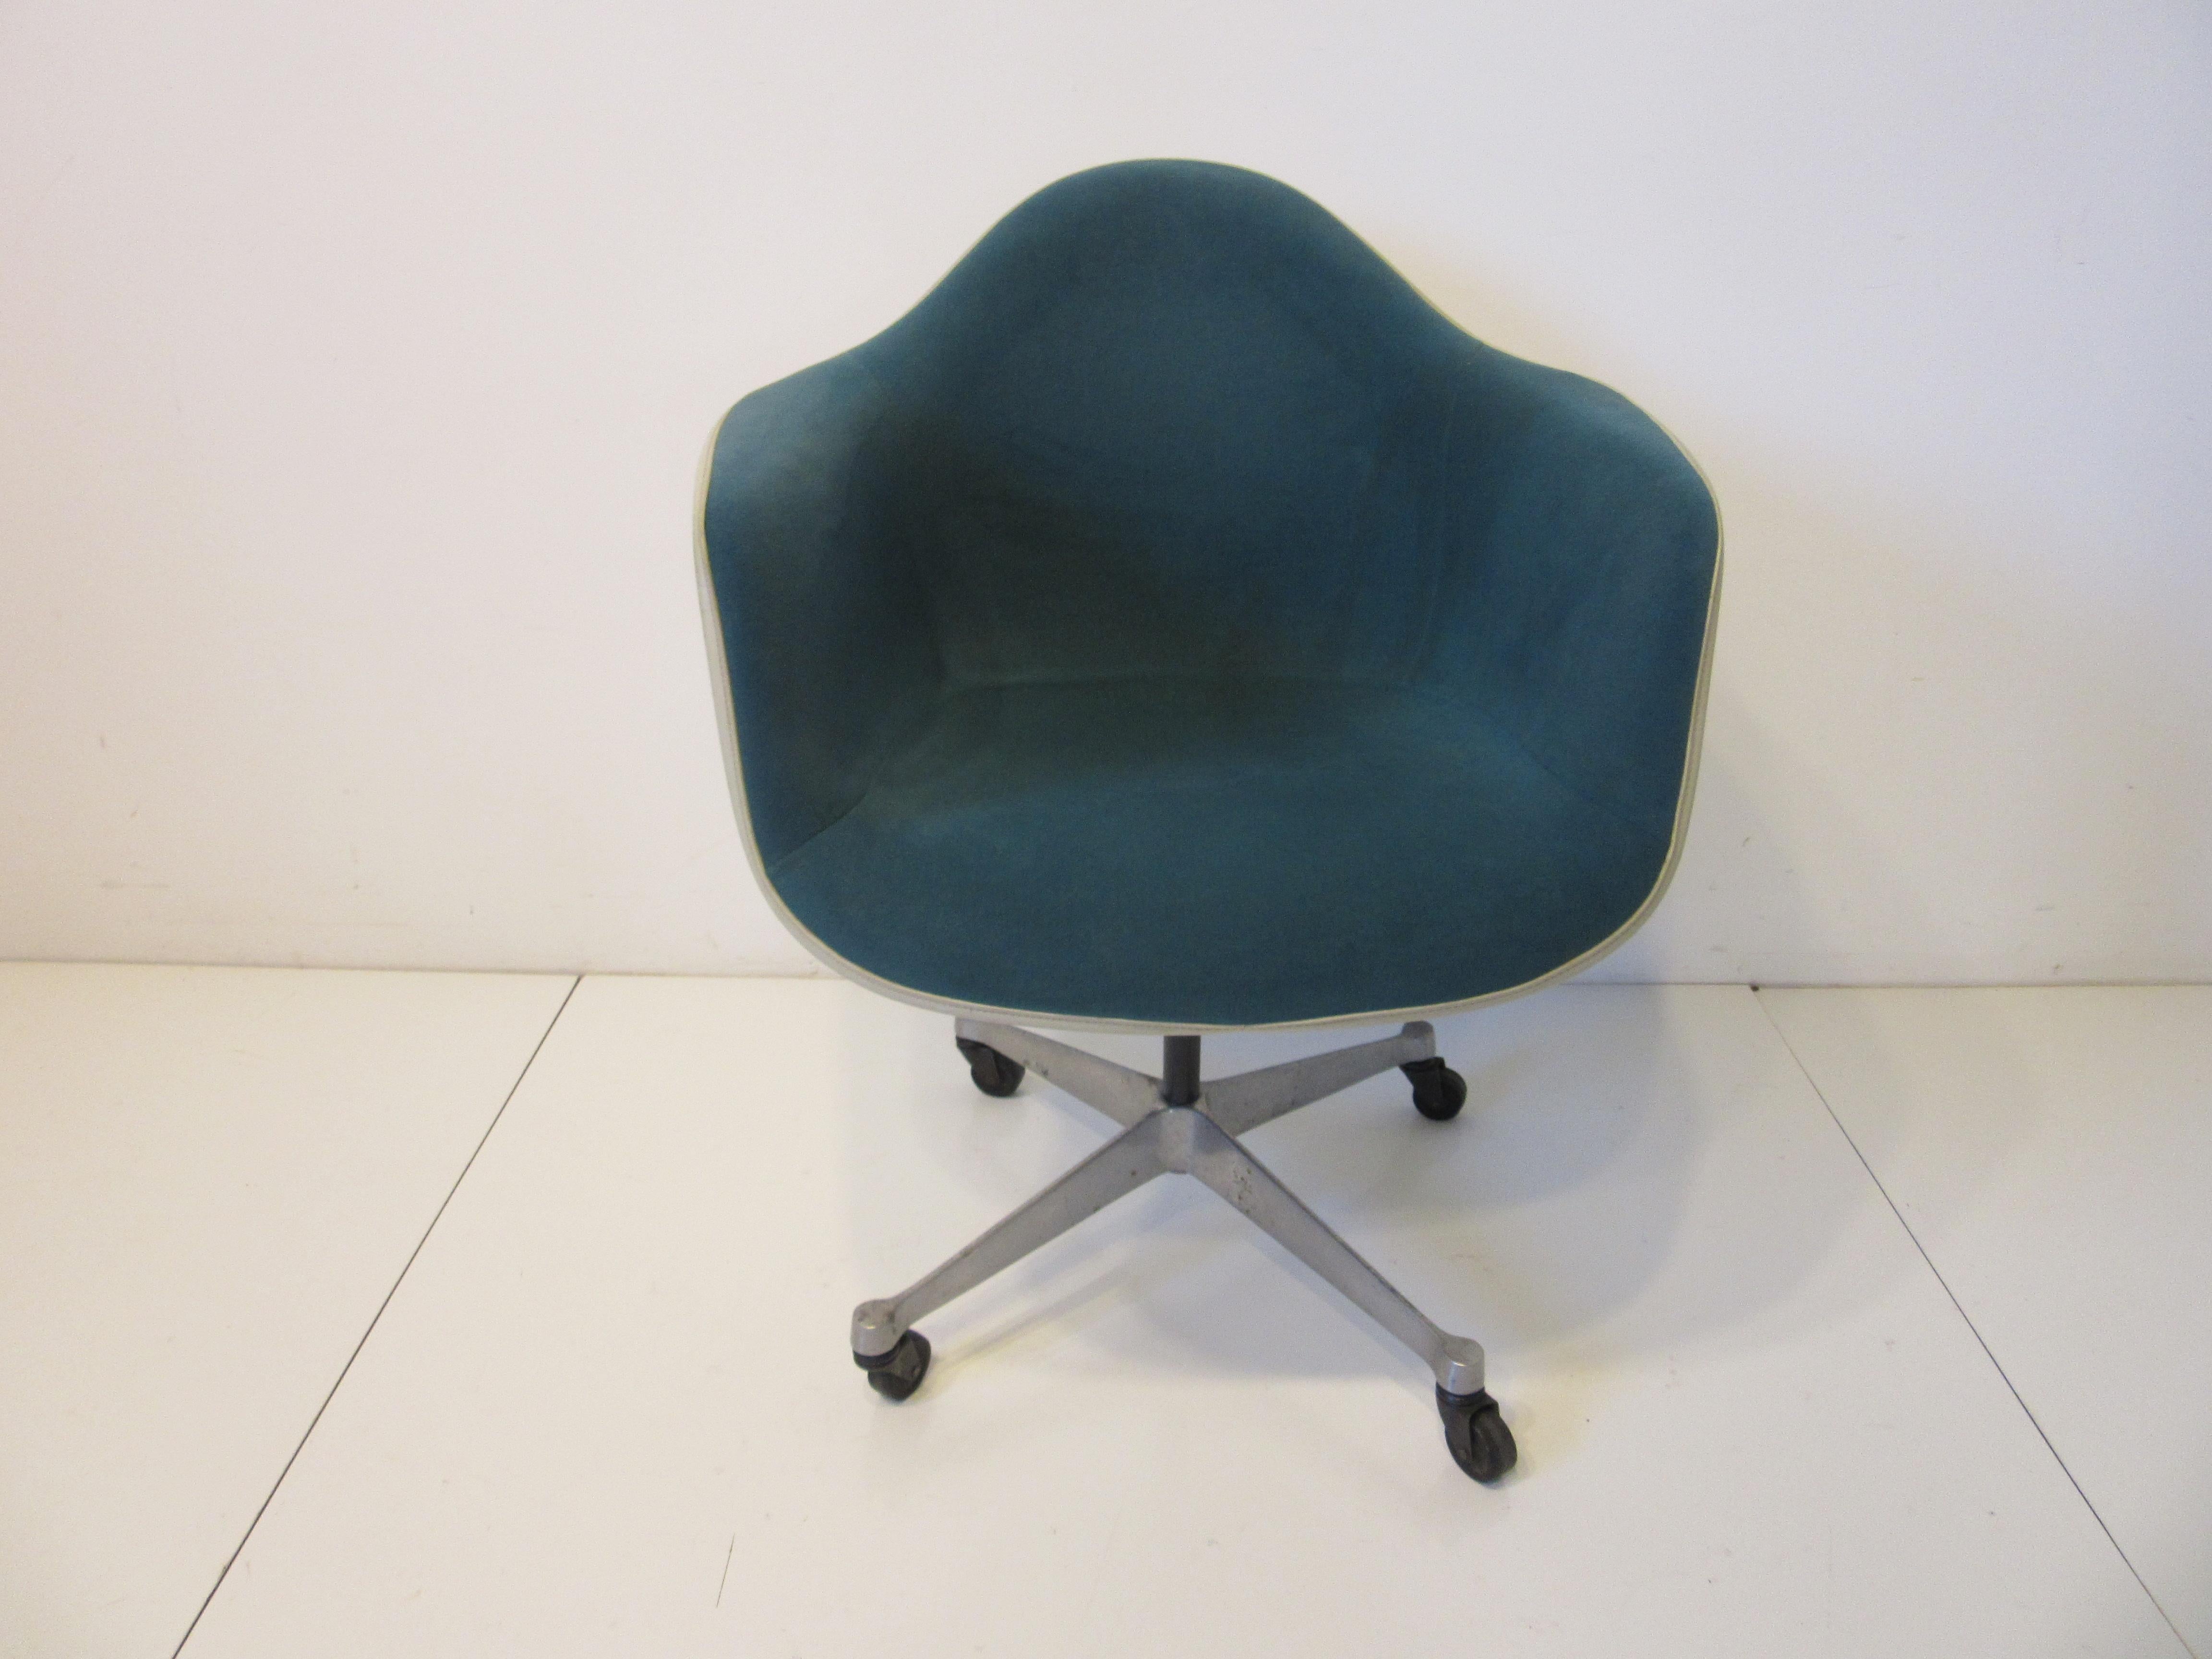 20th Century Eames Arm Shell Desk Chair by Herman Miller 